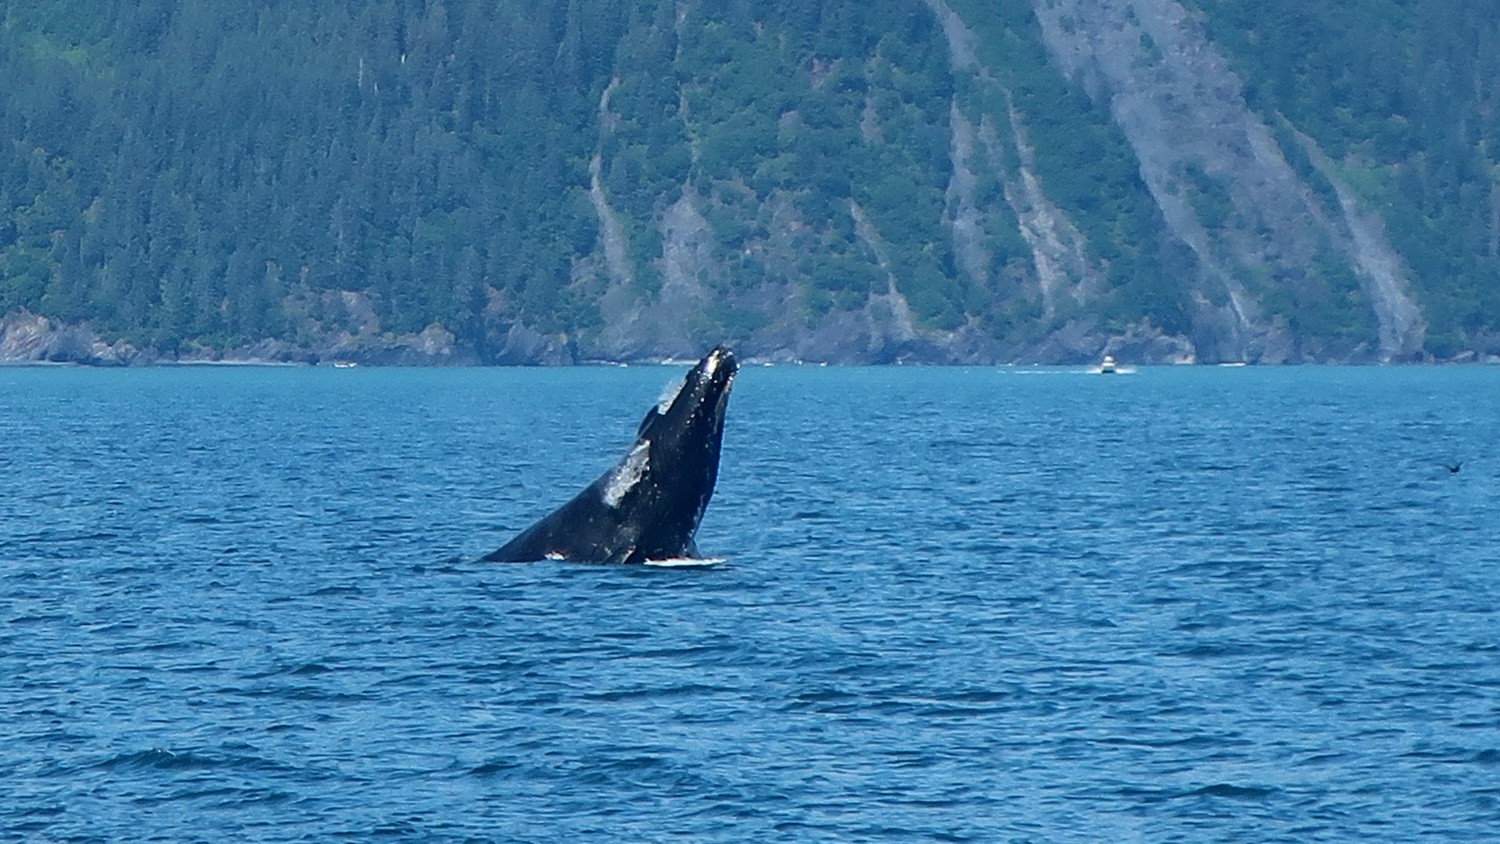 Jumping Whale in Resurrection bay